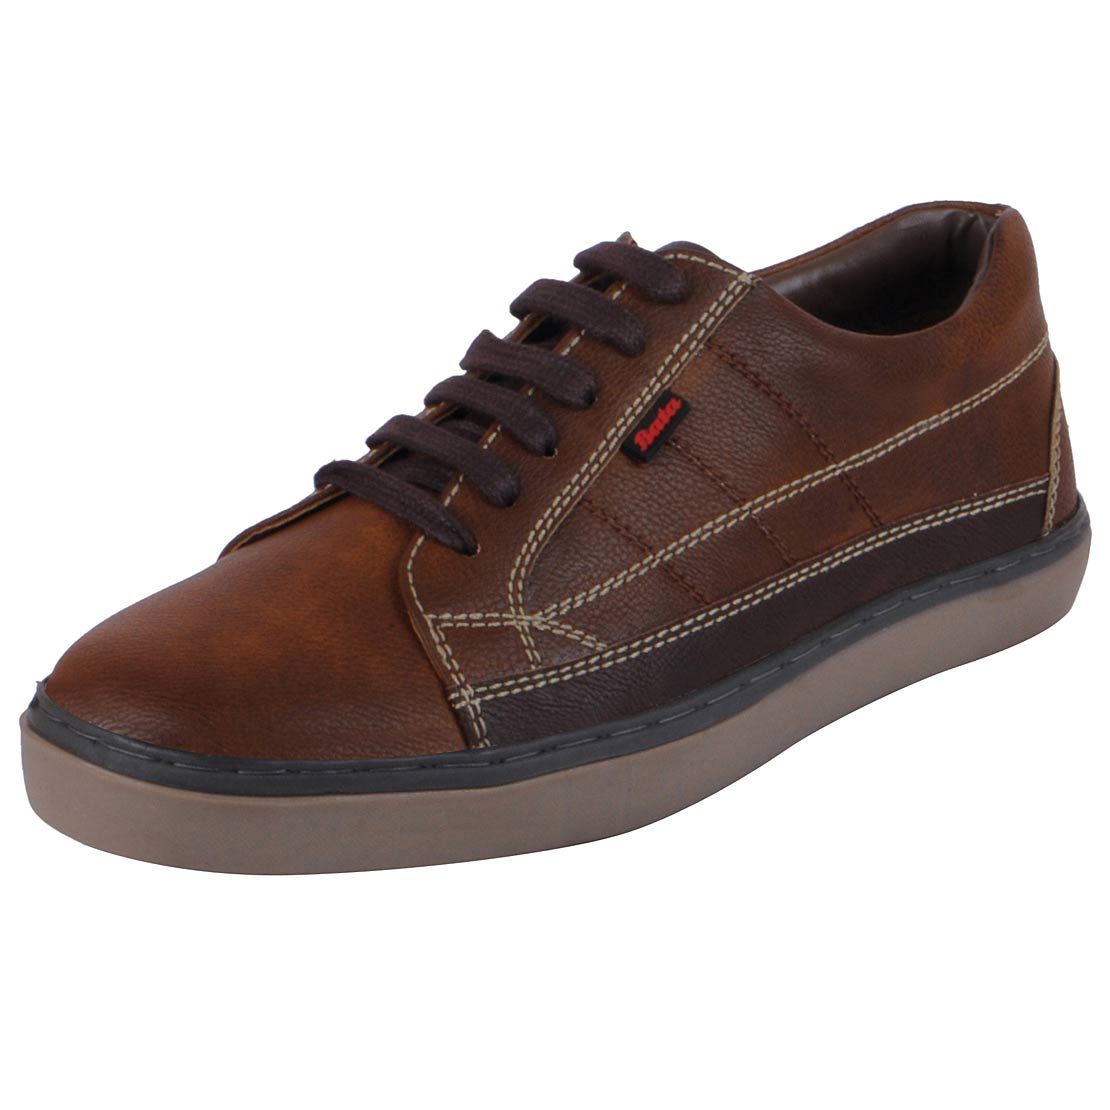 Buy Bata Men's Brown Sneakers Casual Shoes Online @ ₹1349 from ShopClues